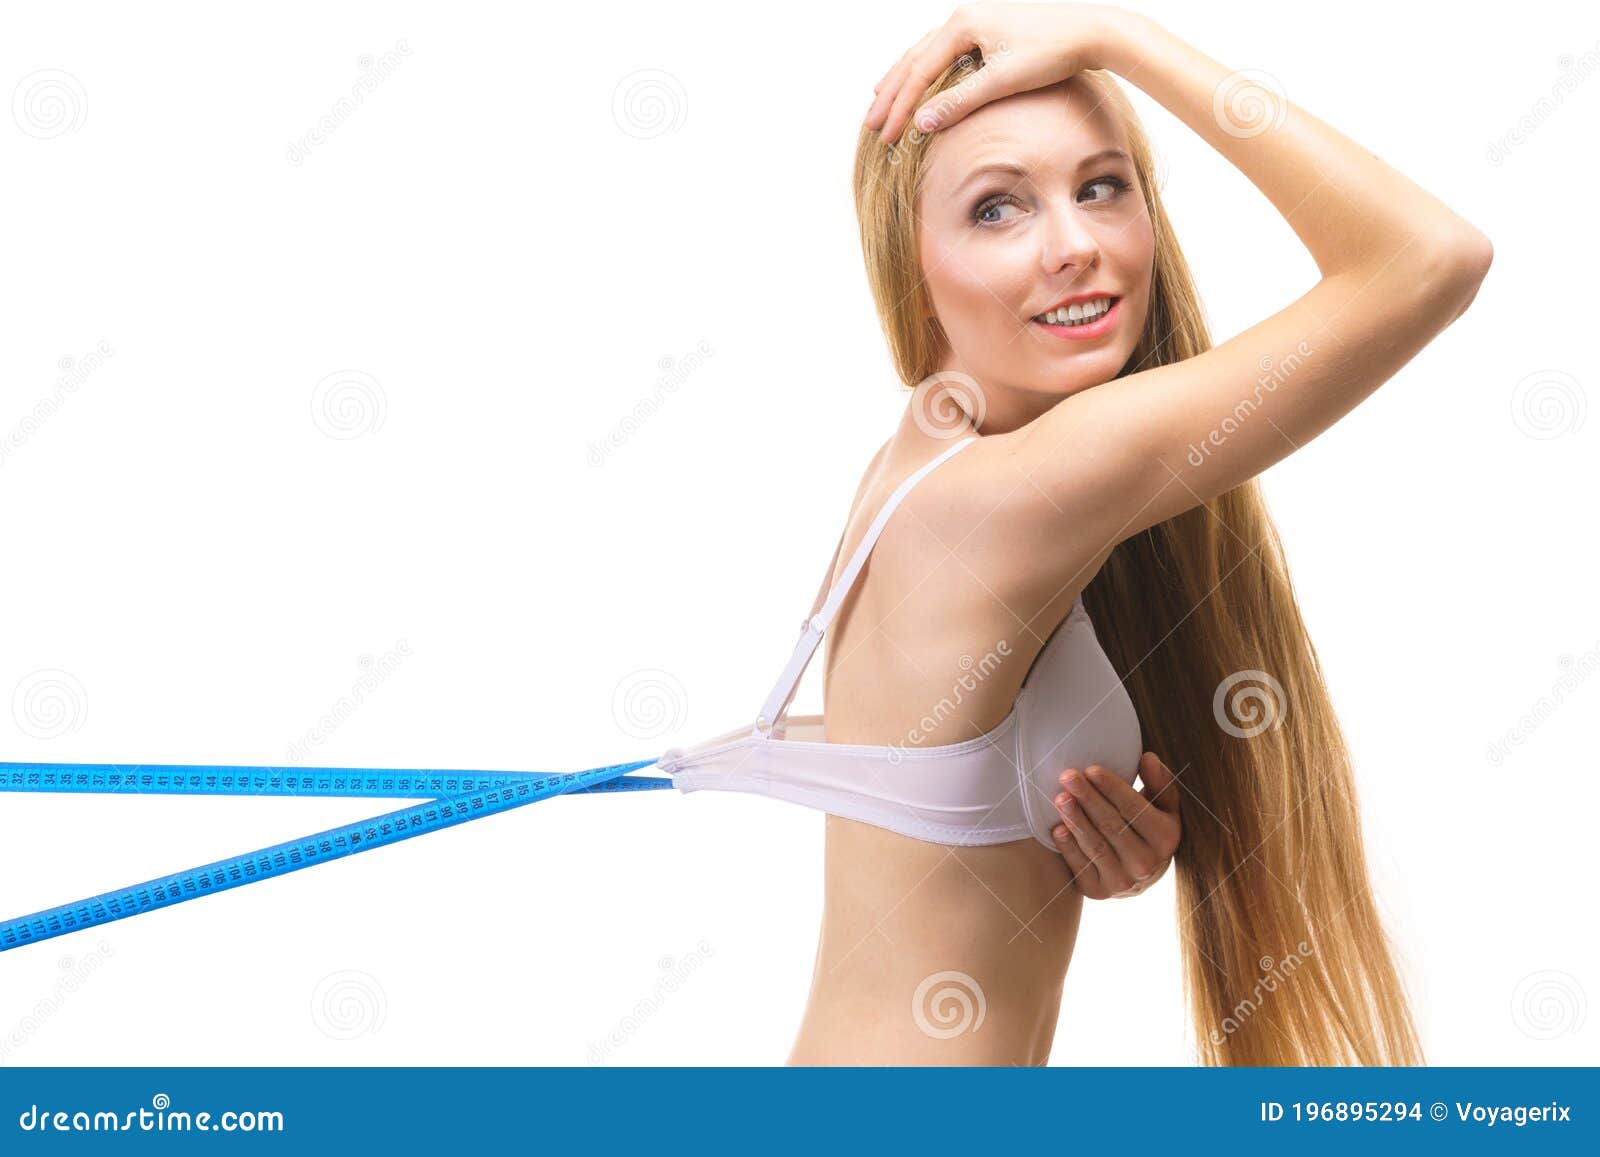 Female Wearing Too Big Bra, Wrong Size Stock Photo - Image of band, boobs:  186667344